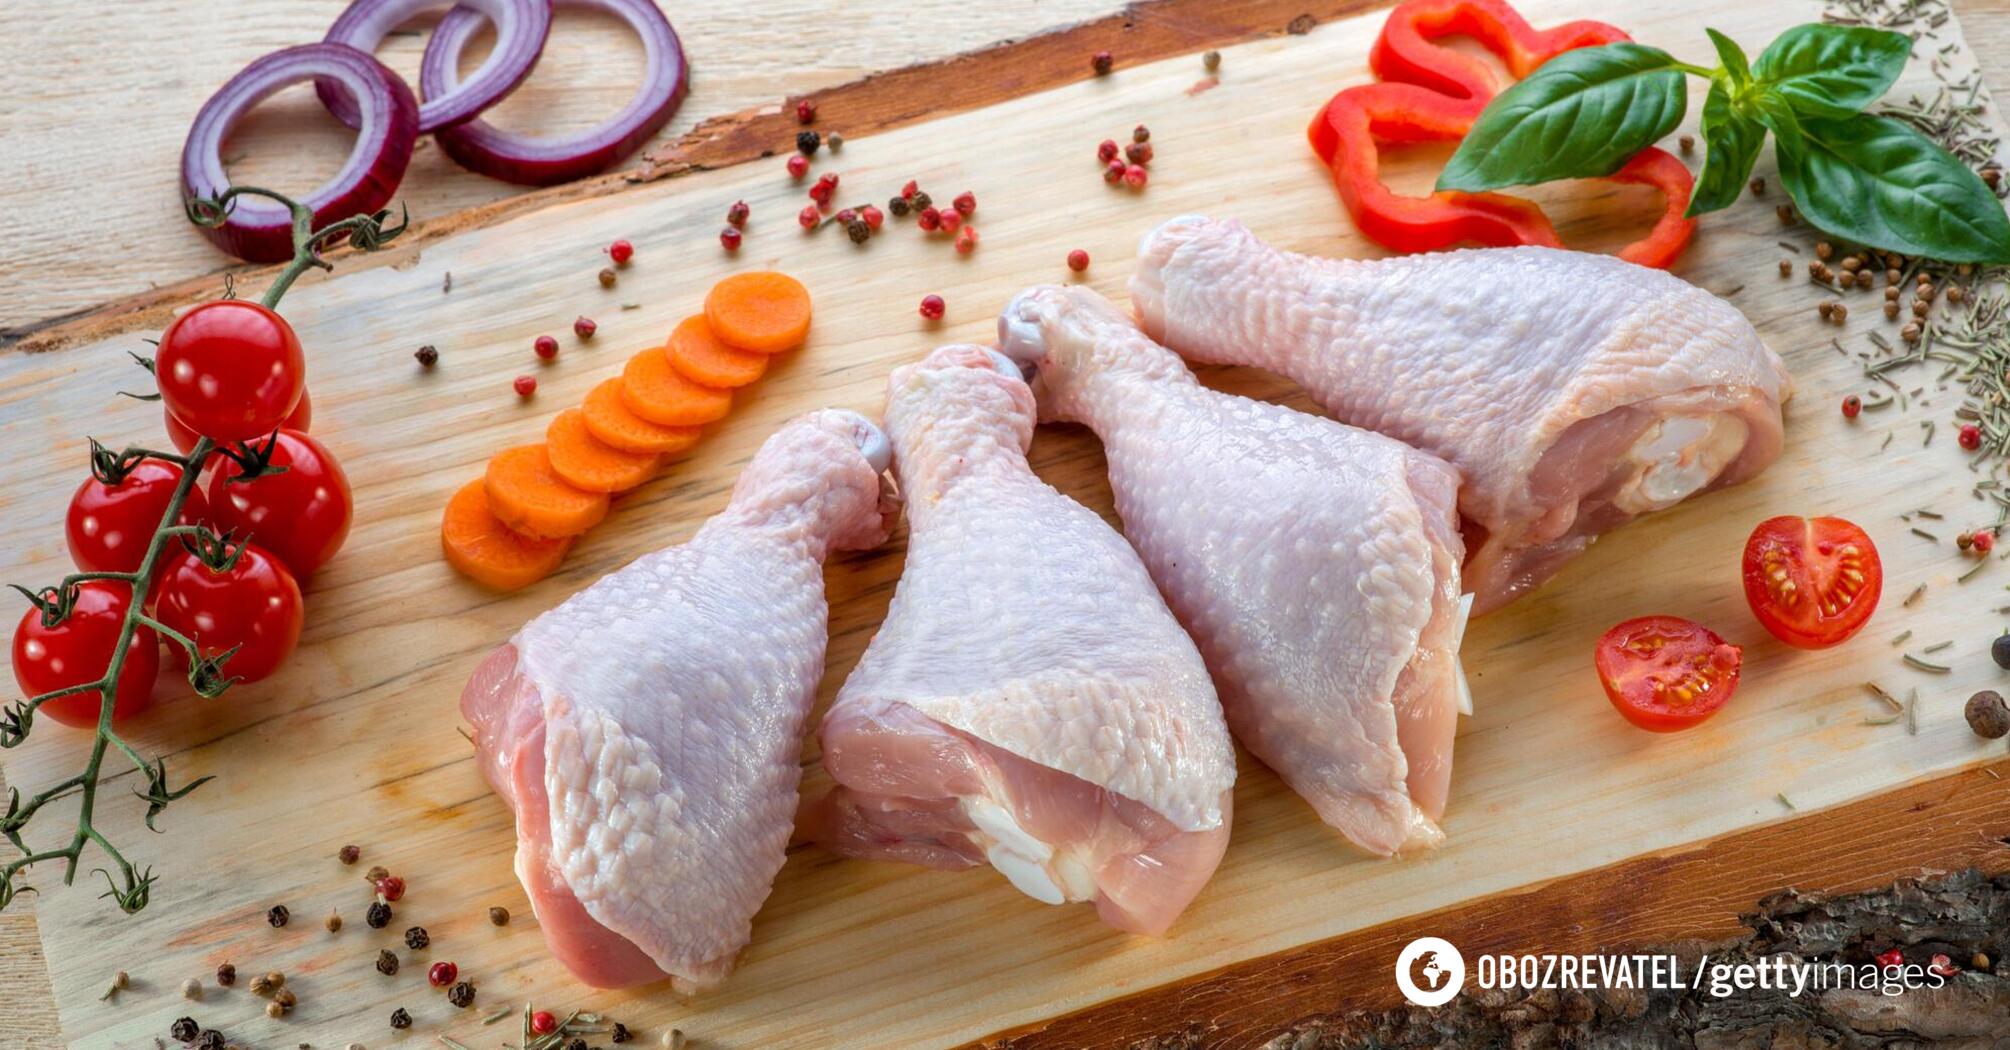 Chicken meat often leads to food poisoning